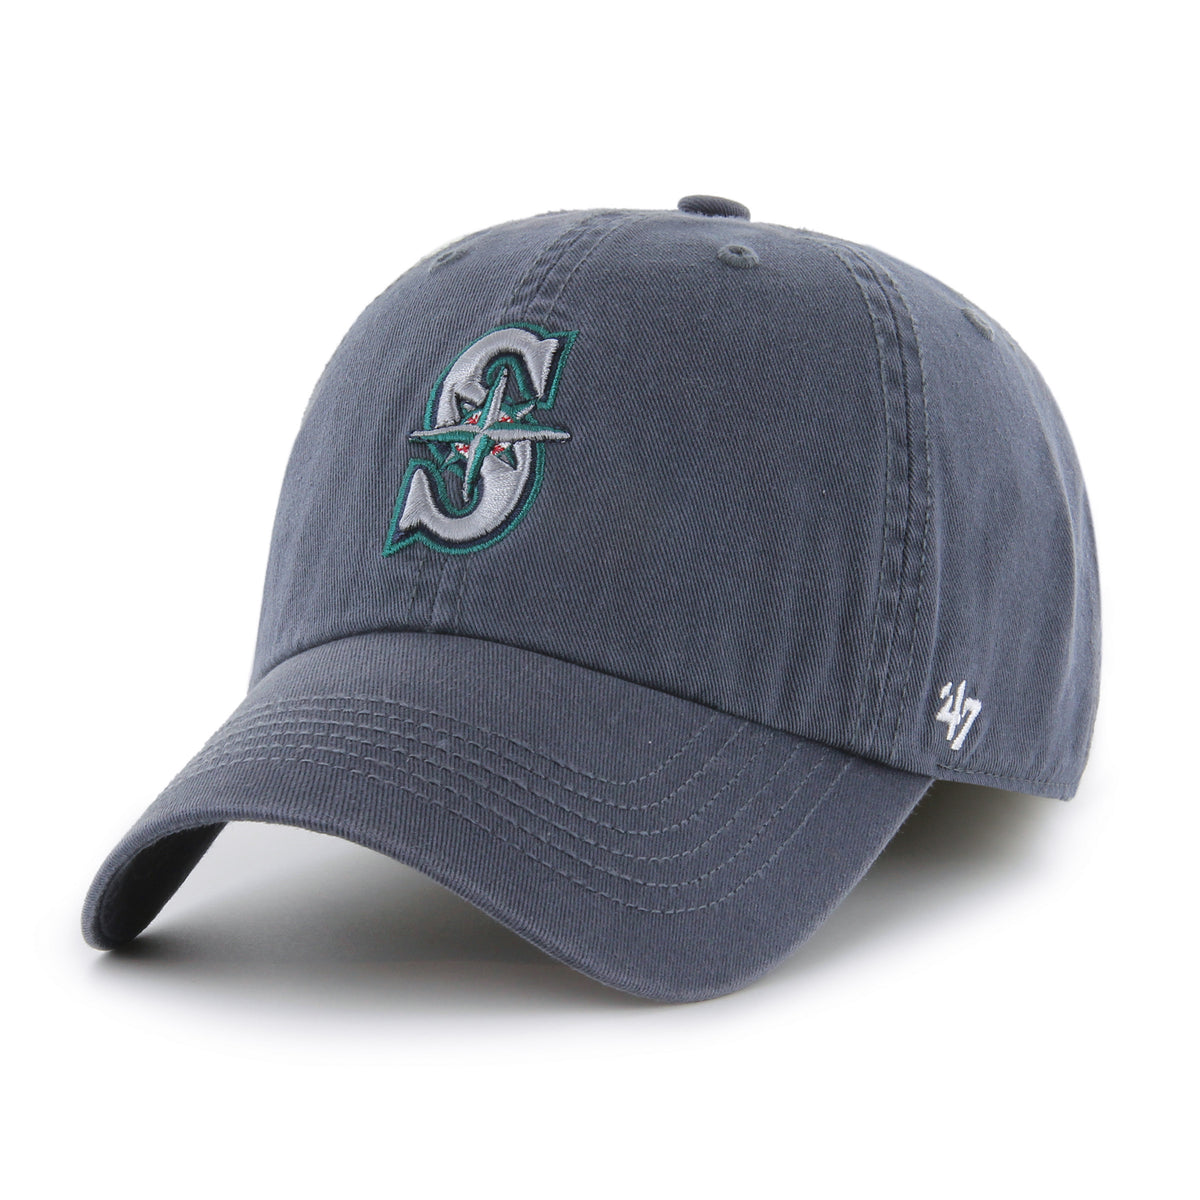 SEATTLE MARINERS CLASSIC '47 FRANCHISE